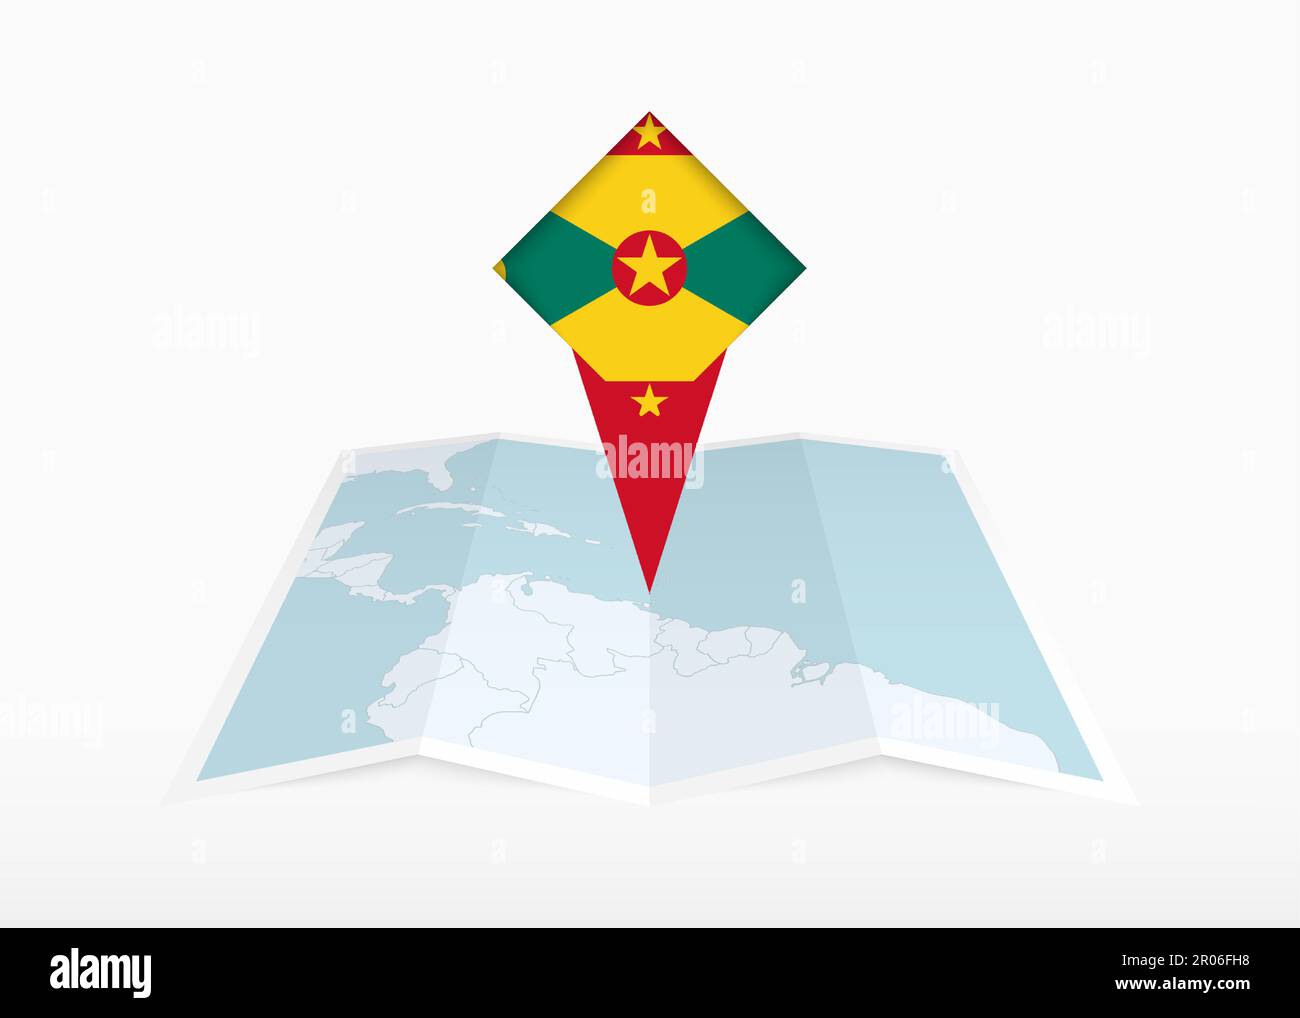 Grenada is depicted on a folded paper map and pinned location marker with flag of Grenada. Folded vector map. Stock Vector